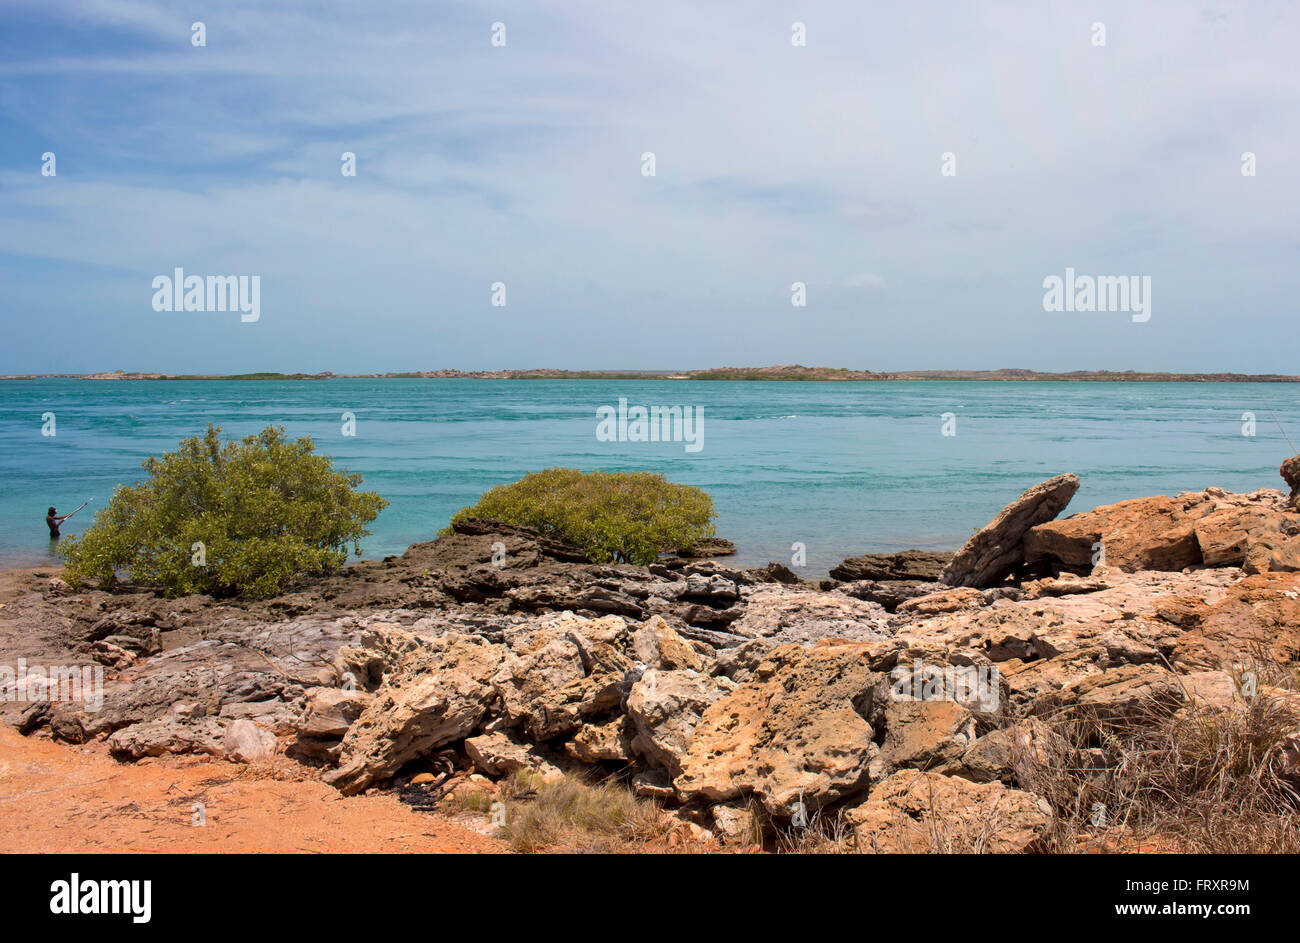 Landscape at One Arm Point, Ardyloon, or Bardi in Kimberley region of North Western Australia, an isolated very remote indigenous community . Stock Photo